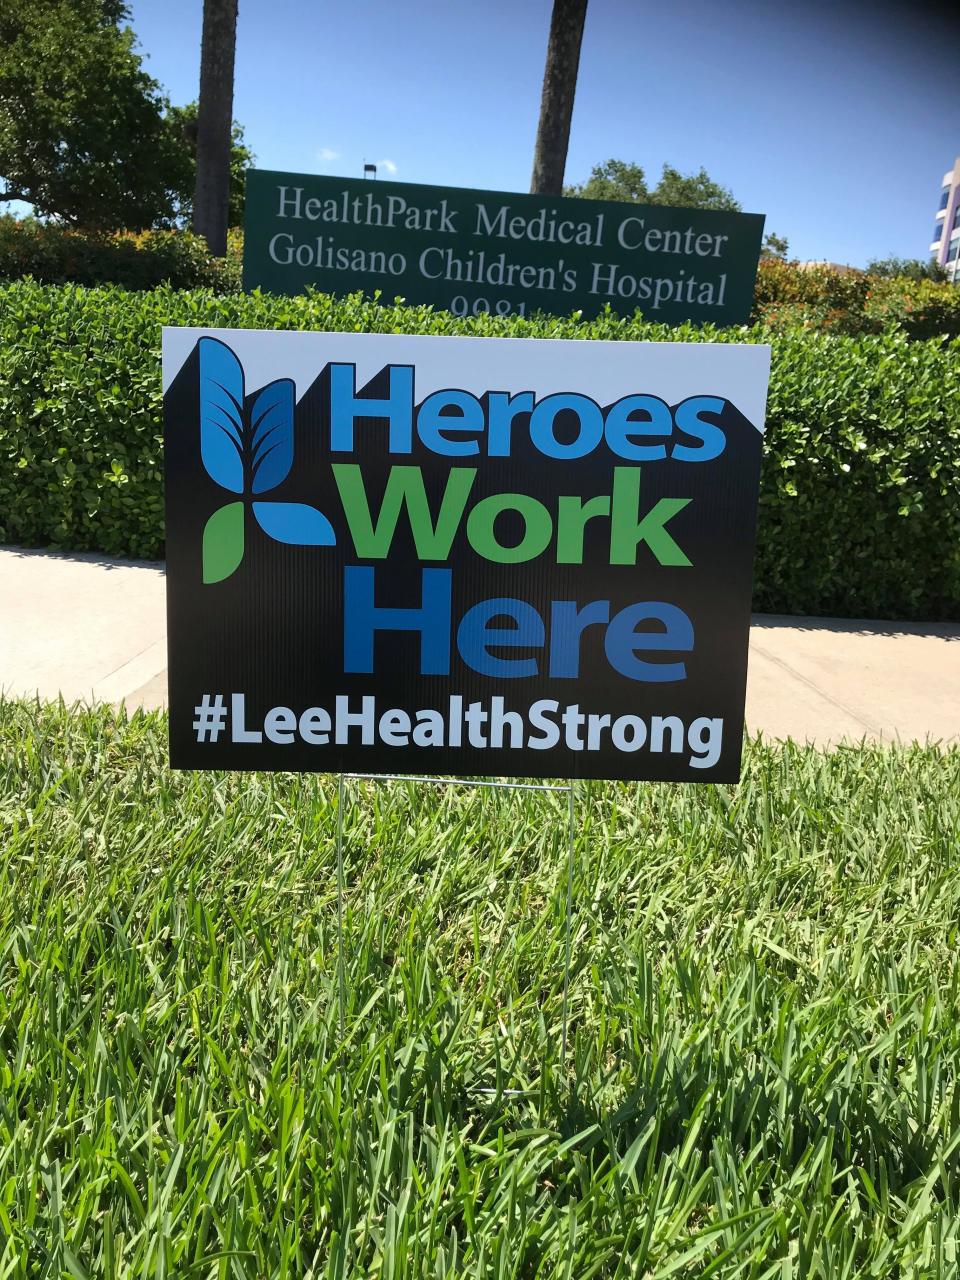 Lee Health operates four acute care hospitals with a combined 1,744 beds, a 135-bed children’s hospital, skilled nursing units and dozens of outpatient care centers.